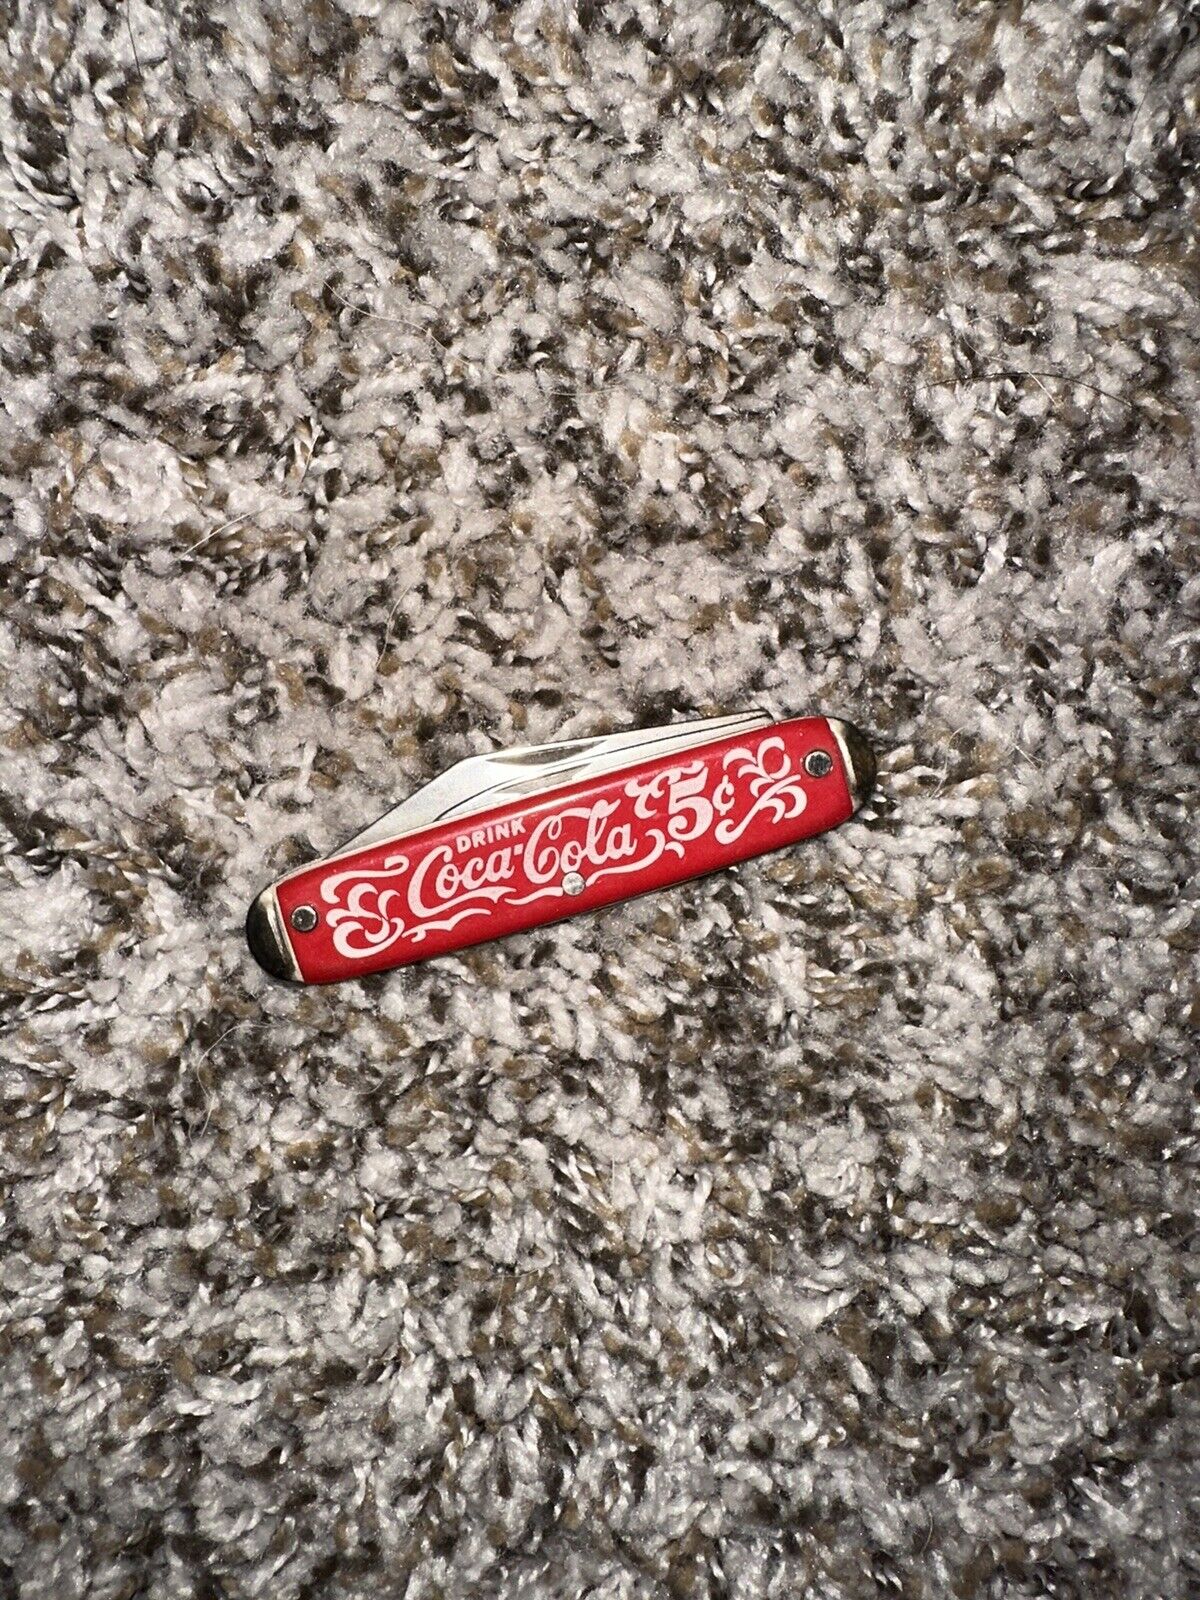 Vintage Coca-Cola knife swiss army style knife 2 blade vtg promo cocacola